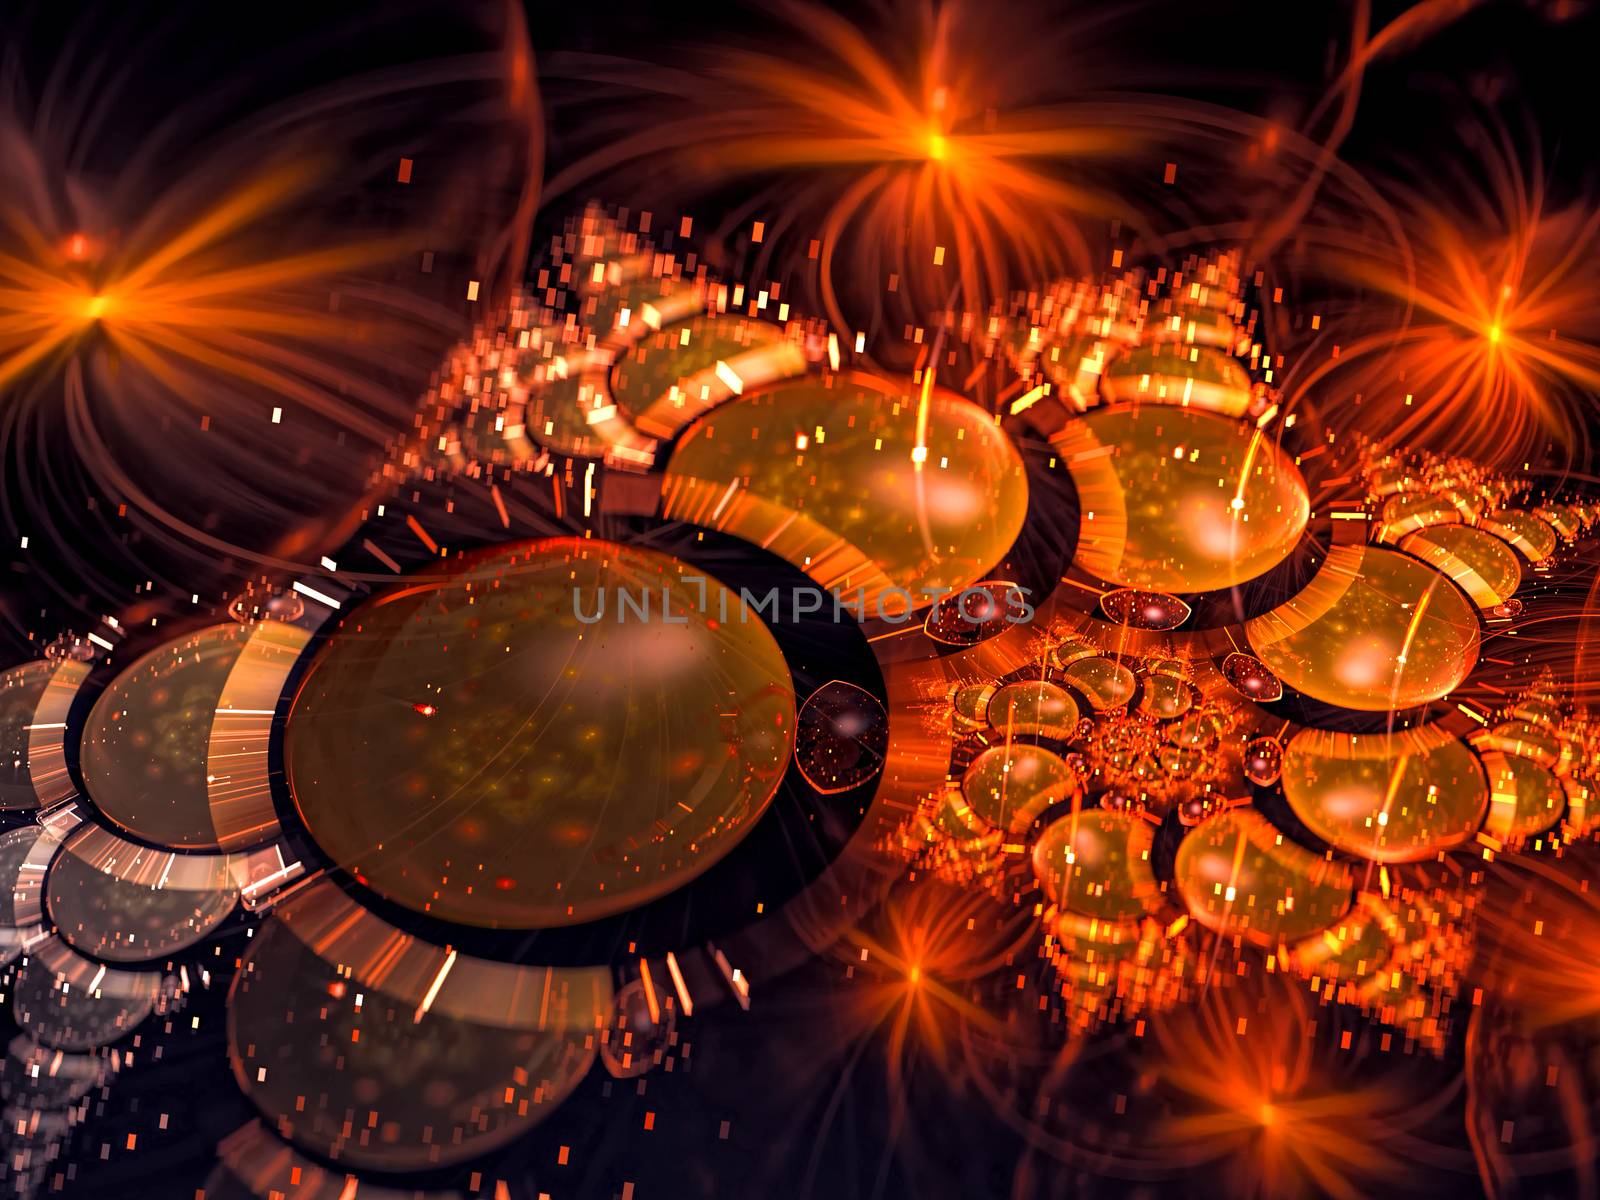 Jewelry background -abstract computer-generated image. Fractal art: chaos glossy beads, sparkles and glowing dots. Blurred festive backdrop for covers, posters, web design.